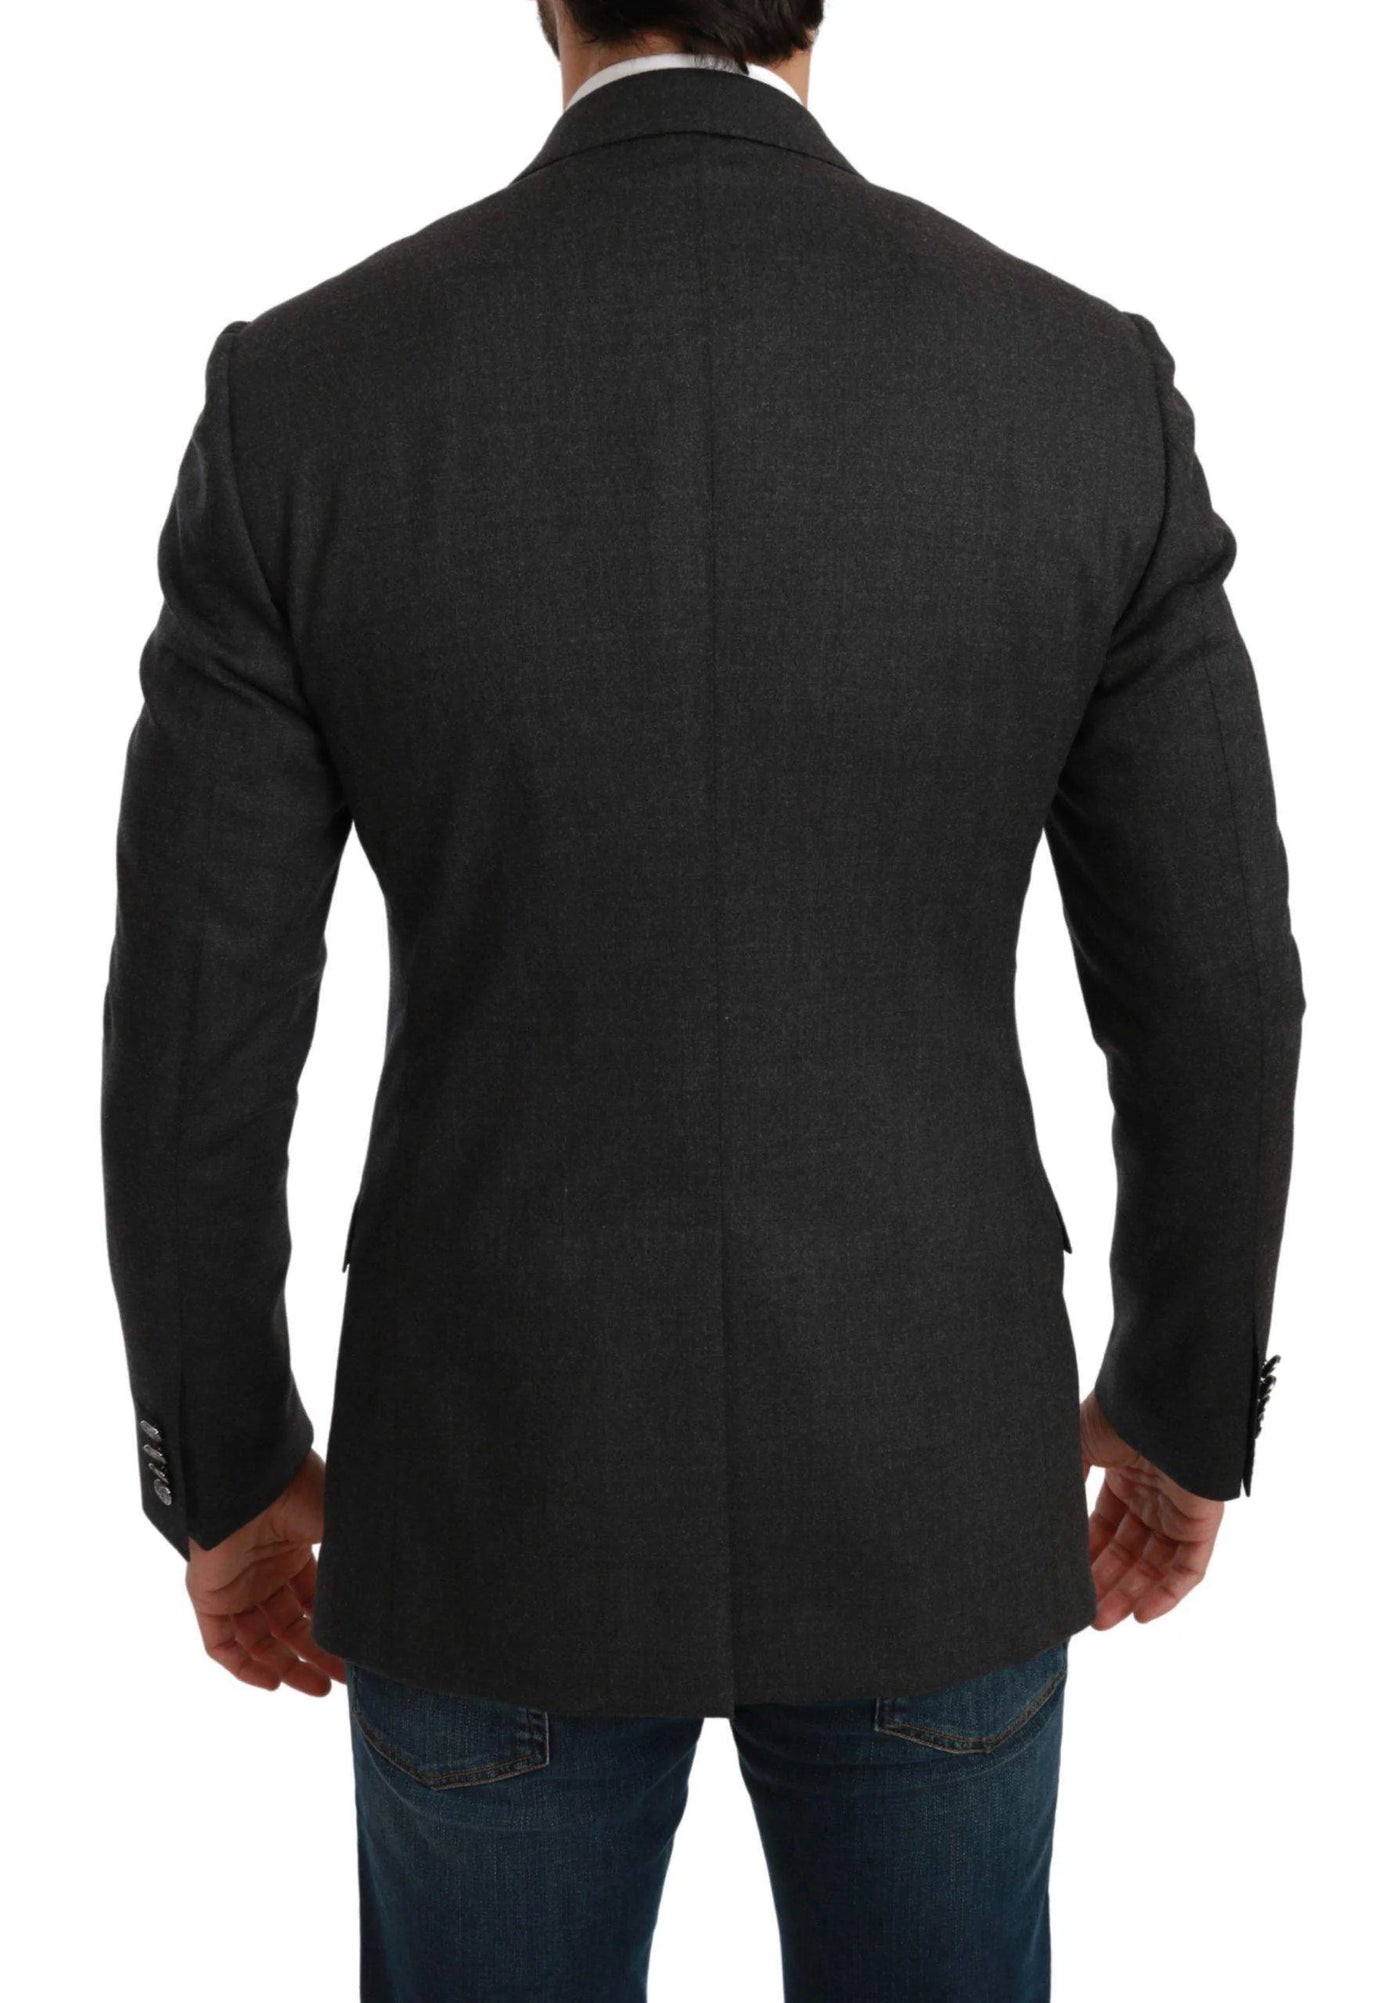 Dolce & Gabbana  Gray NAPOLI Slim Fit Jacket Wool Blazer #men, Blazers - Men - Clothing, Brand_Dolce & Gabbana, Catch, Dolce & Gabbana, feed-agegroup-adult, feed-color-gray, feed-gender-male, feed-size-IT46 | S, feed-size-IT50 | L, Gender_Men, Gray, IT46 | S, IT50 | L, Kogan, Men - New Arrivals at SEYMAYKA